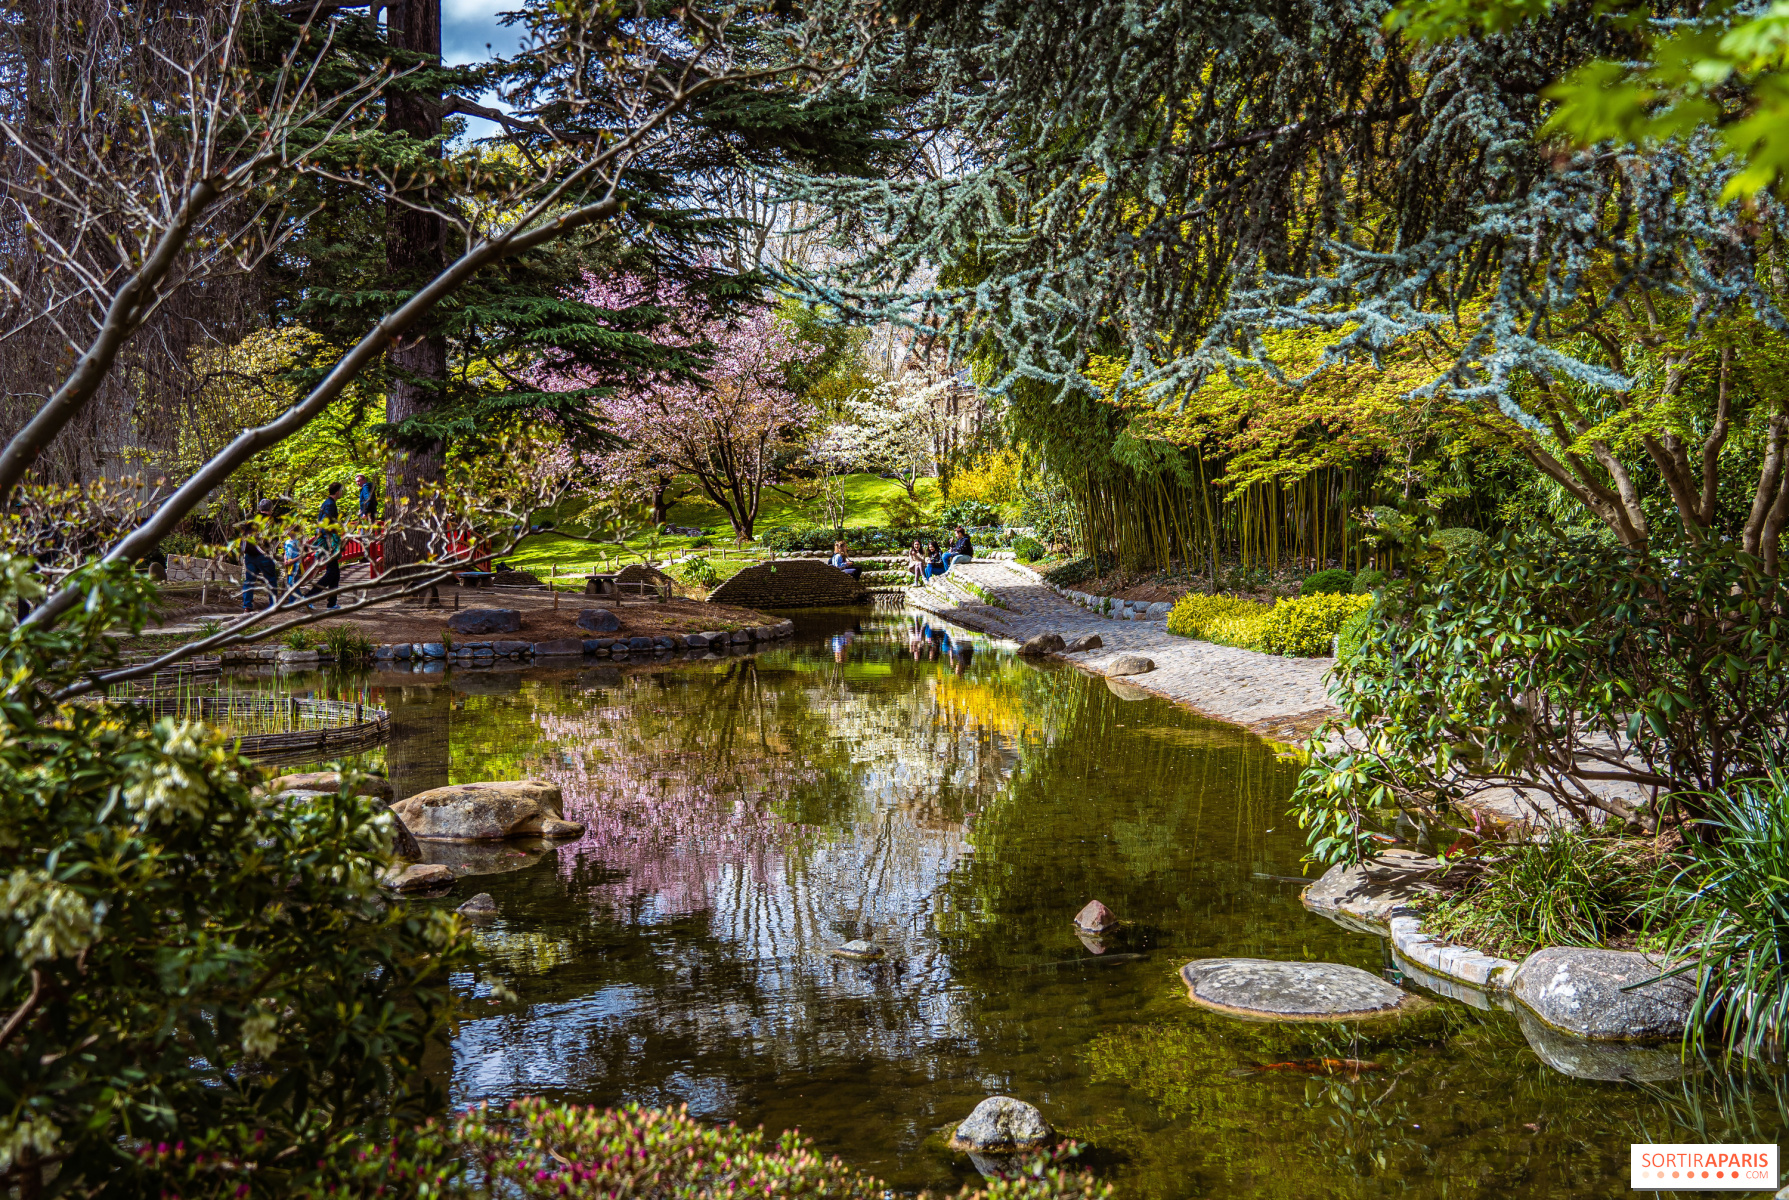 The sublime Japanese garden of the Musée Albert Kahn and its other